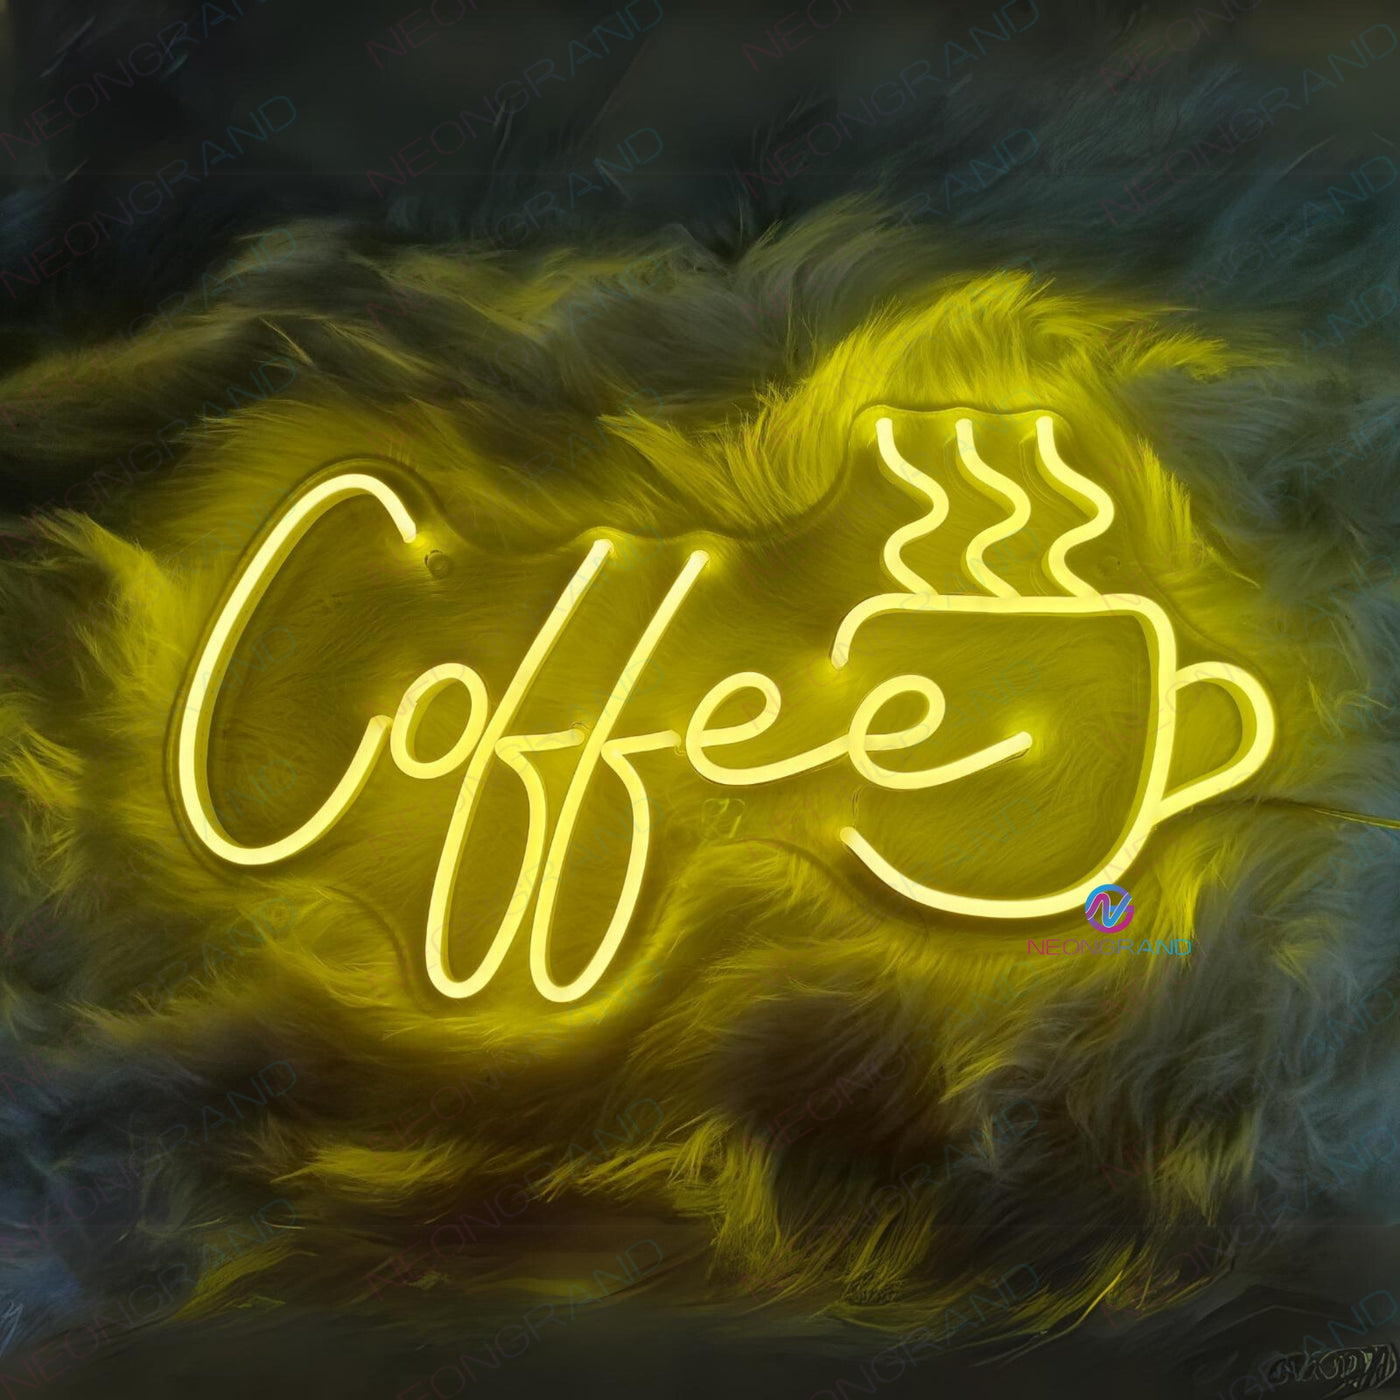 Coffee Neon Sign Neon Cafe Sign Led Light yellow